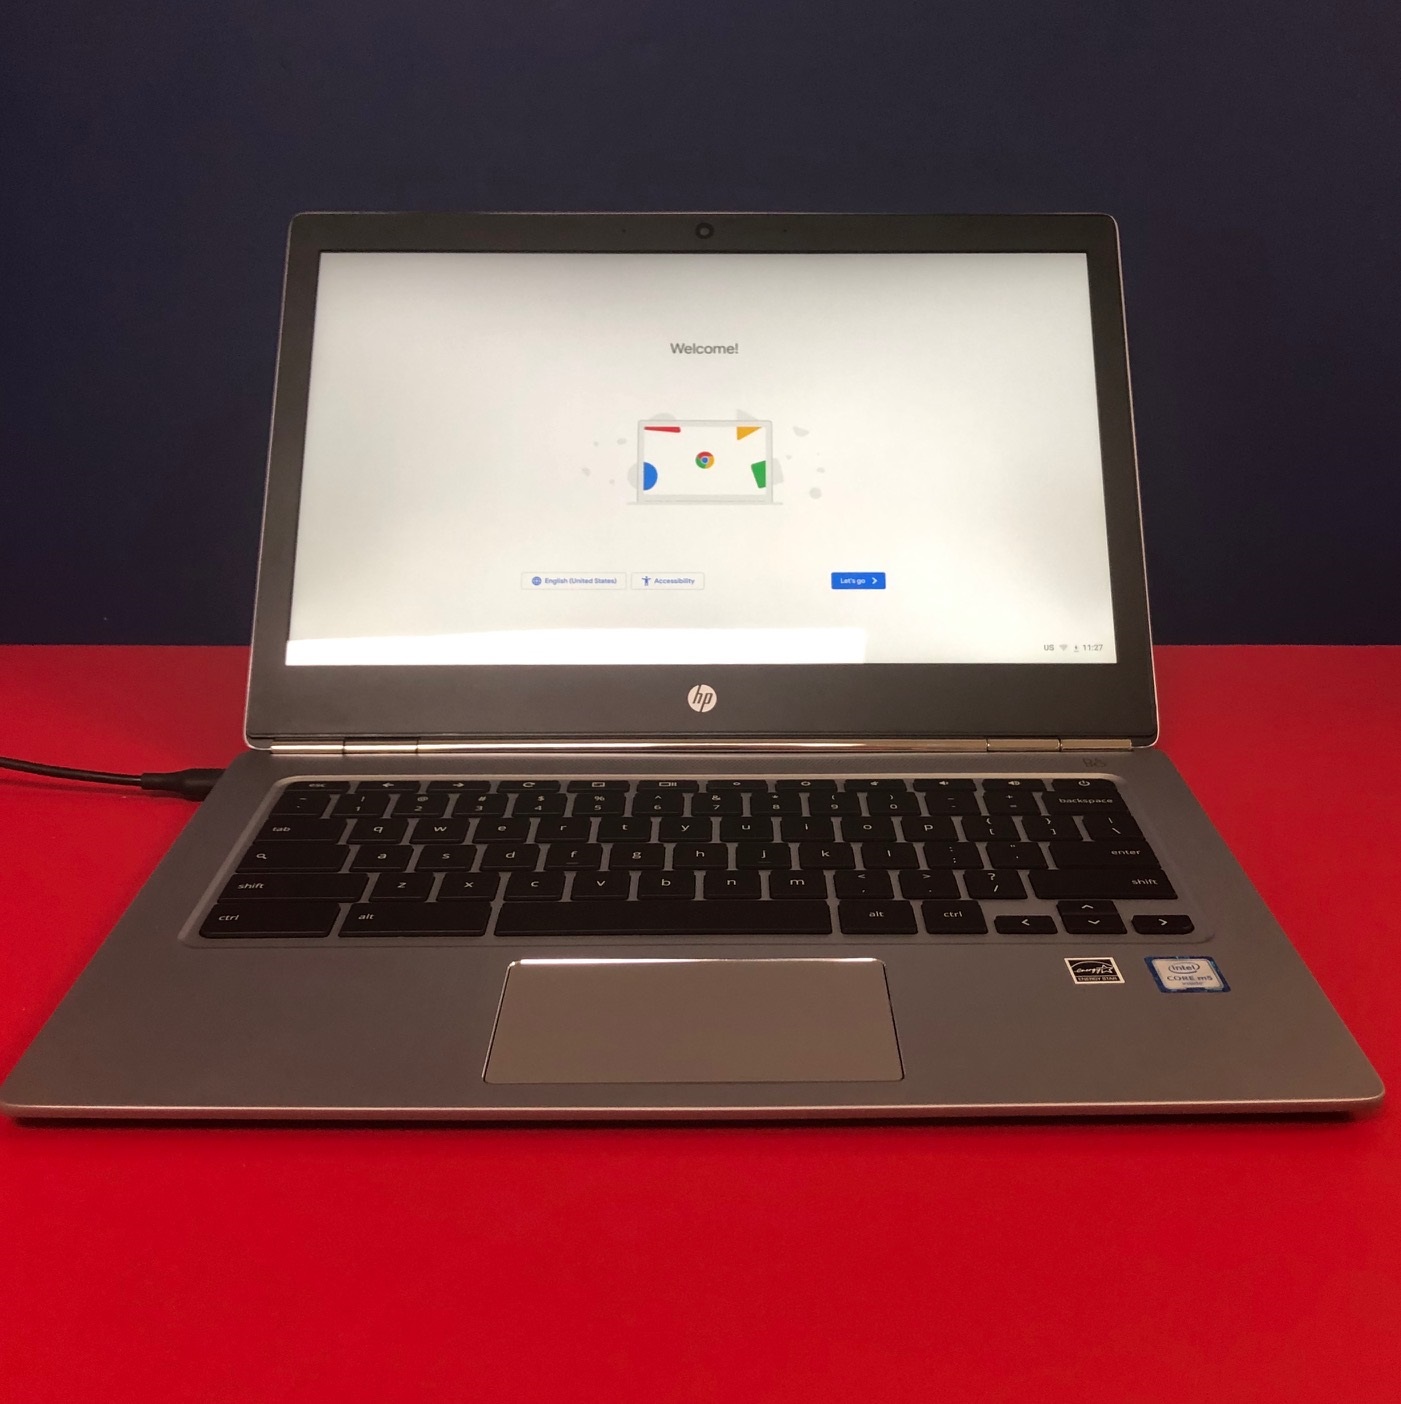 using a microsoft wireless mouse 3500 on samsung chromebook